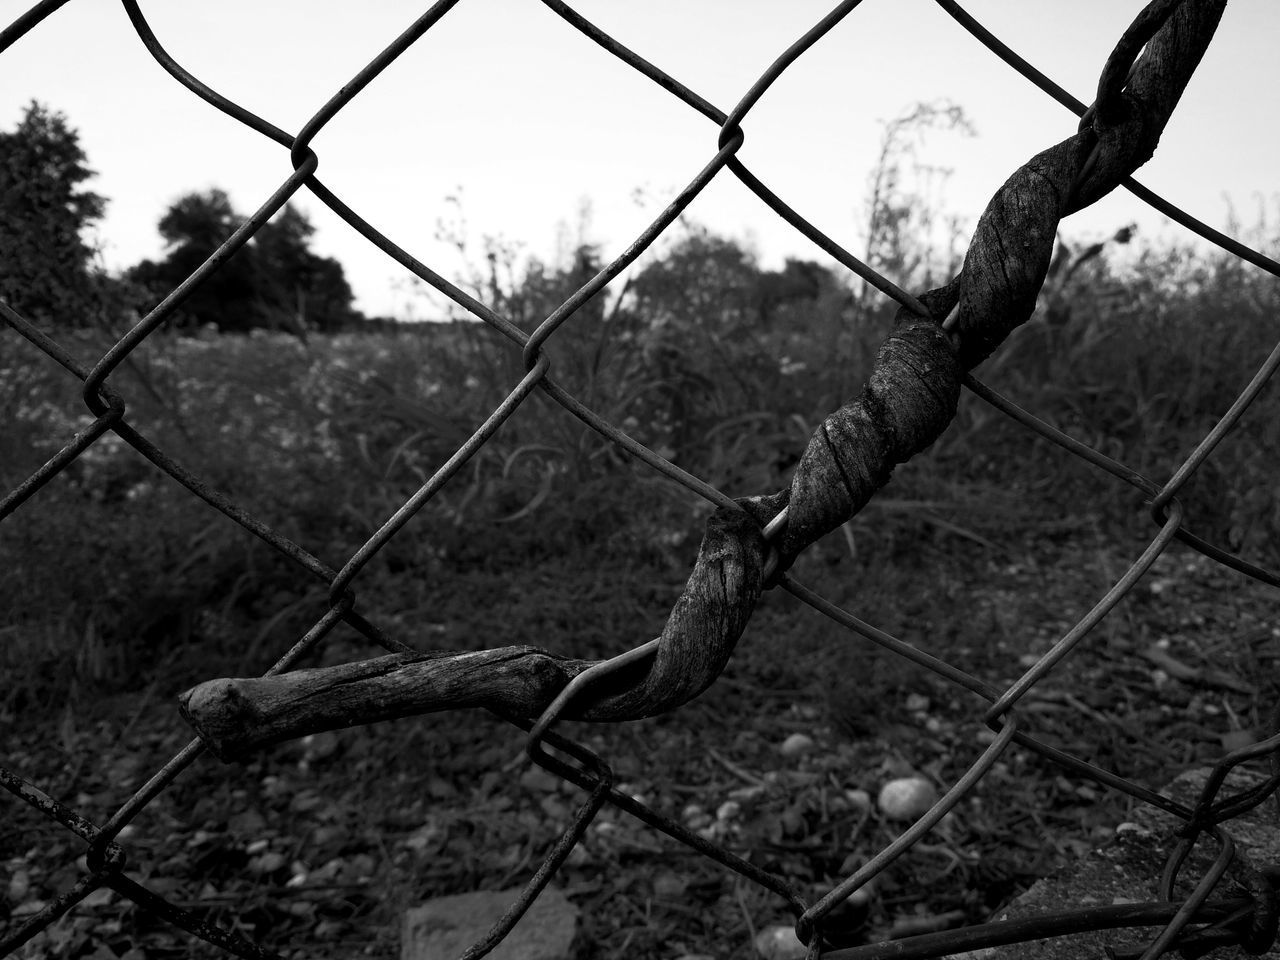 CLOSE-UP OF CHAINLINK FENCE BY TREE